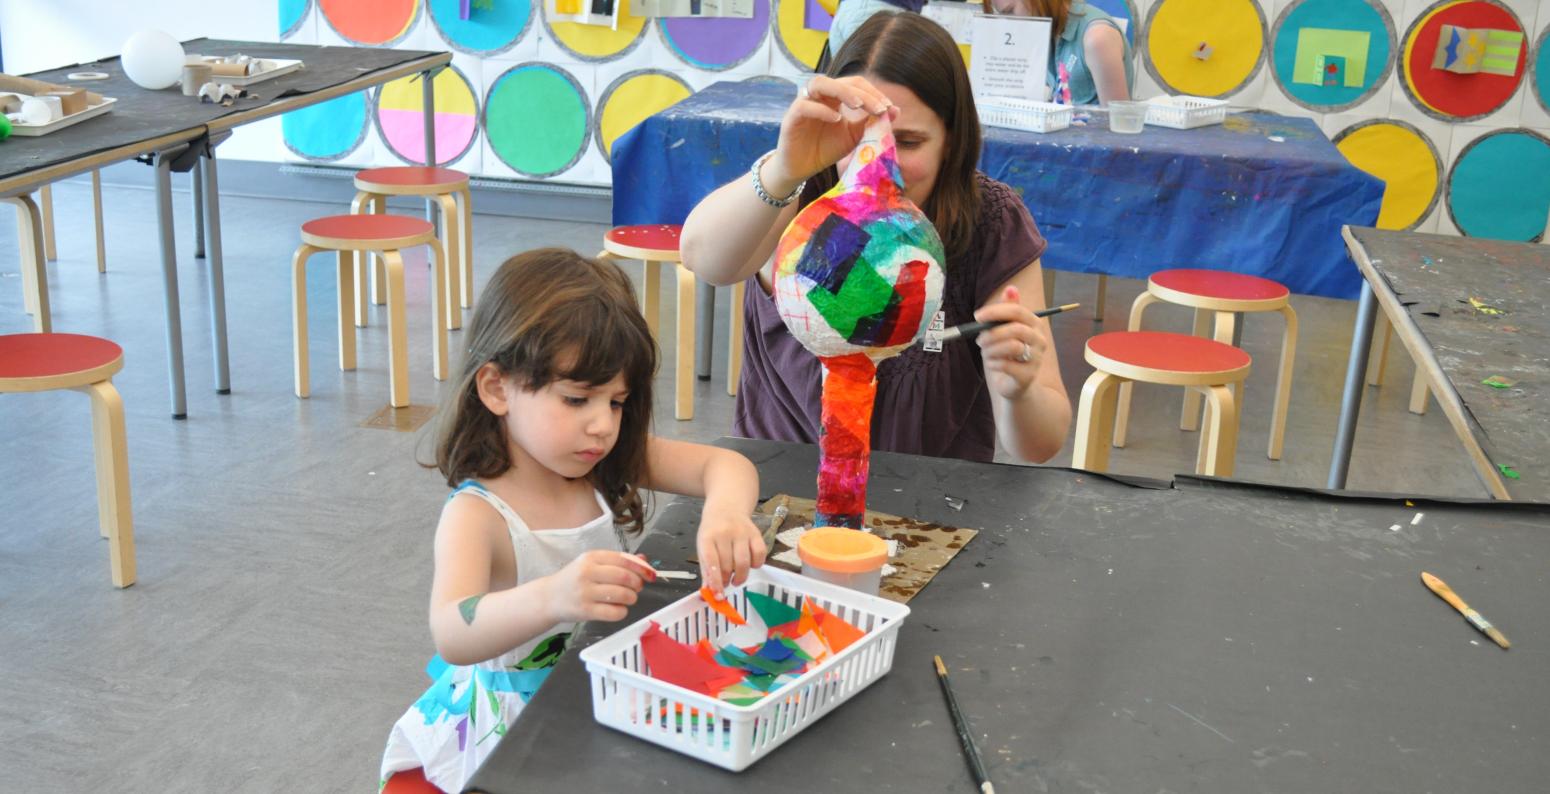 Two people making tissue paper sculptures in the studio.